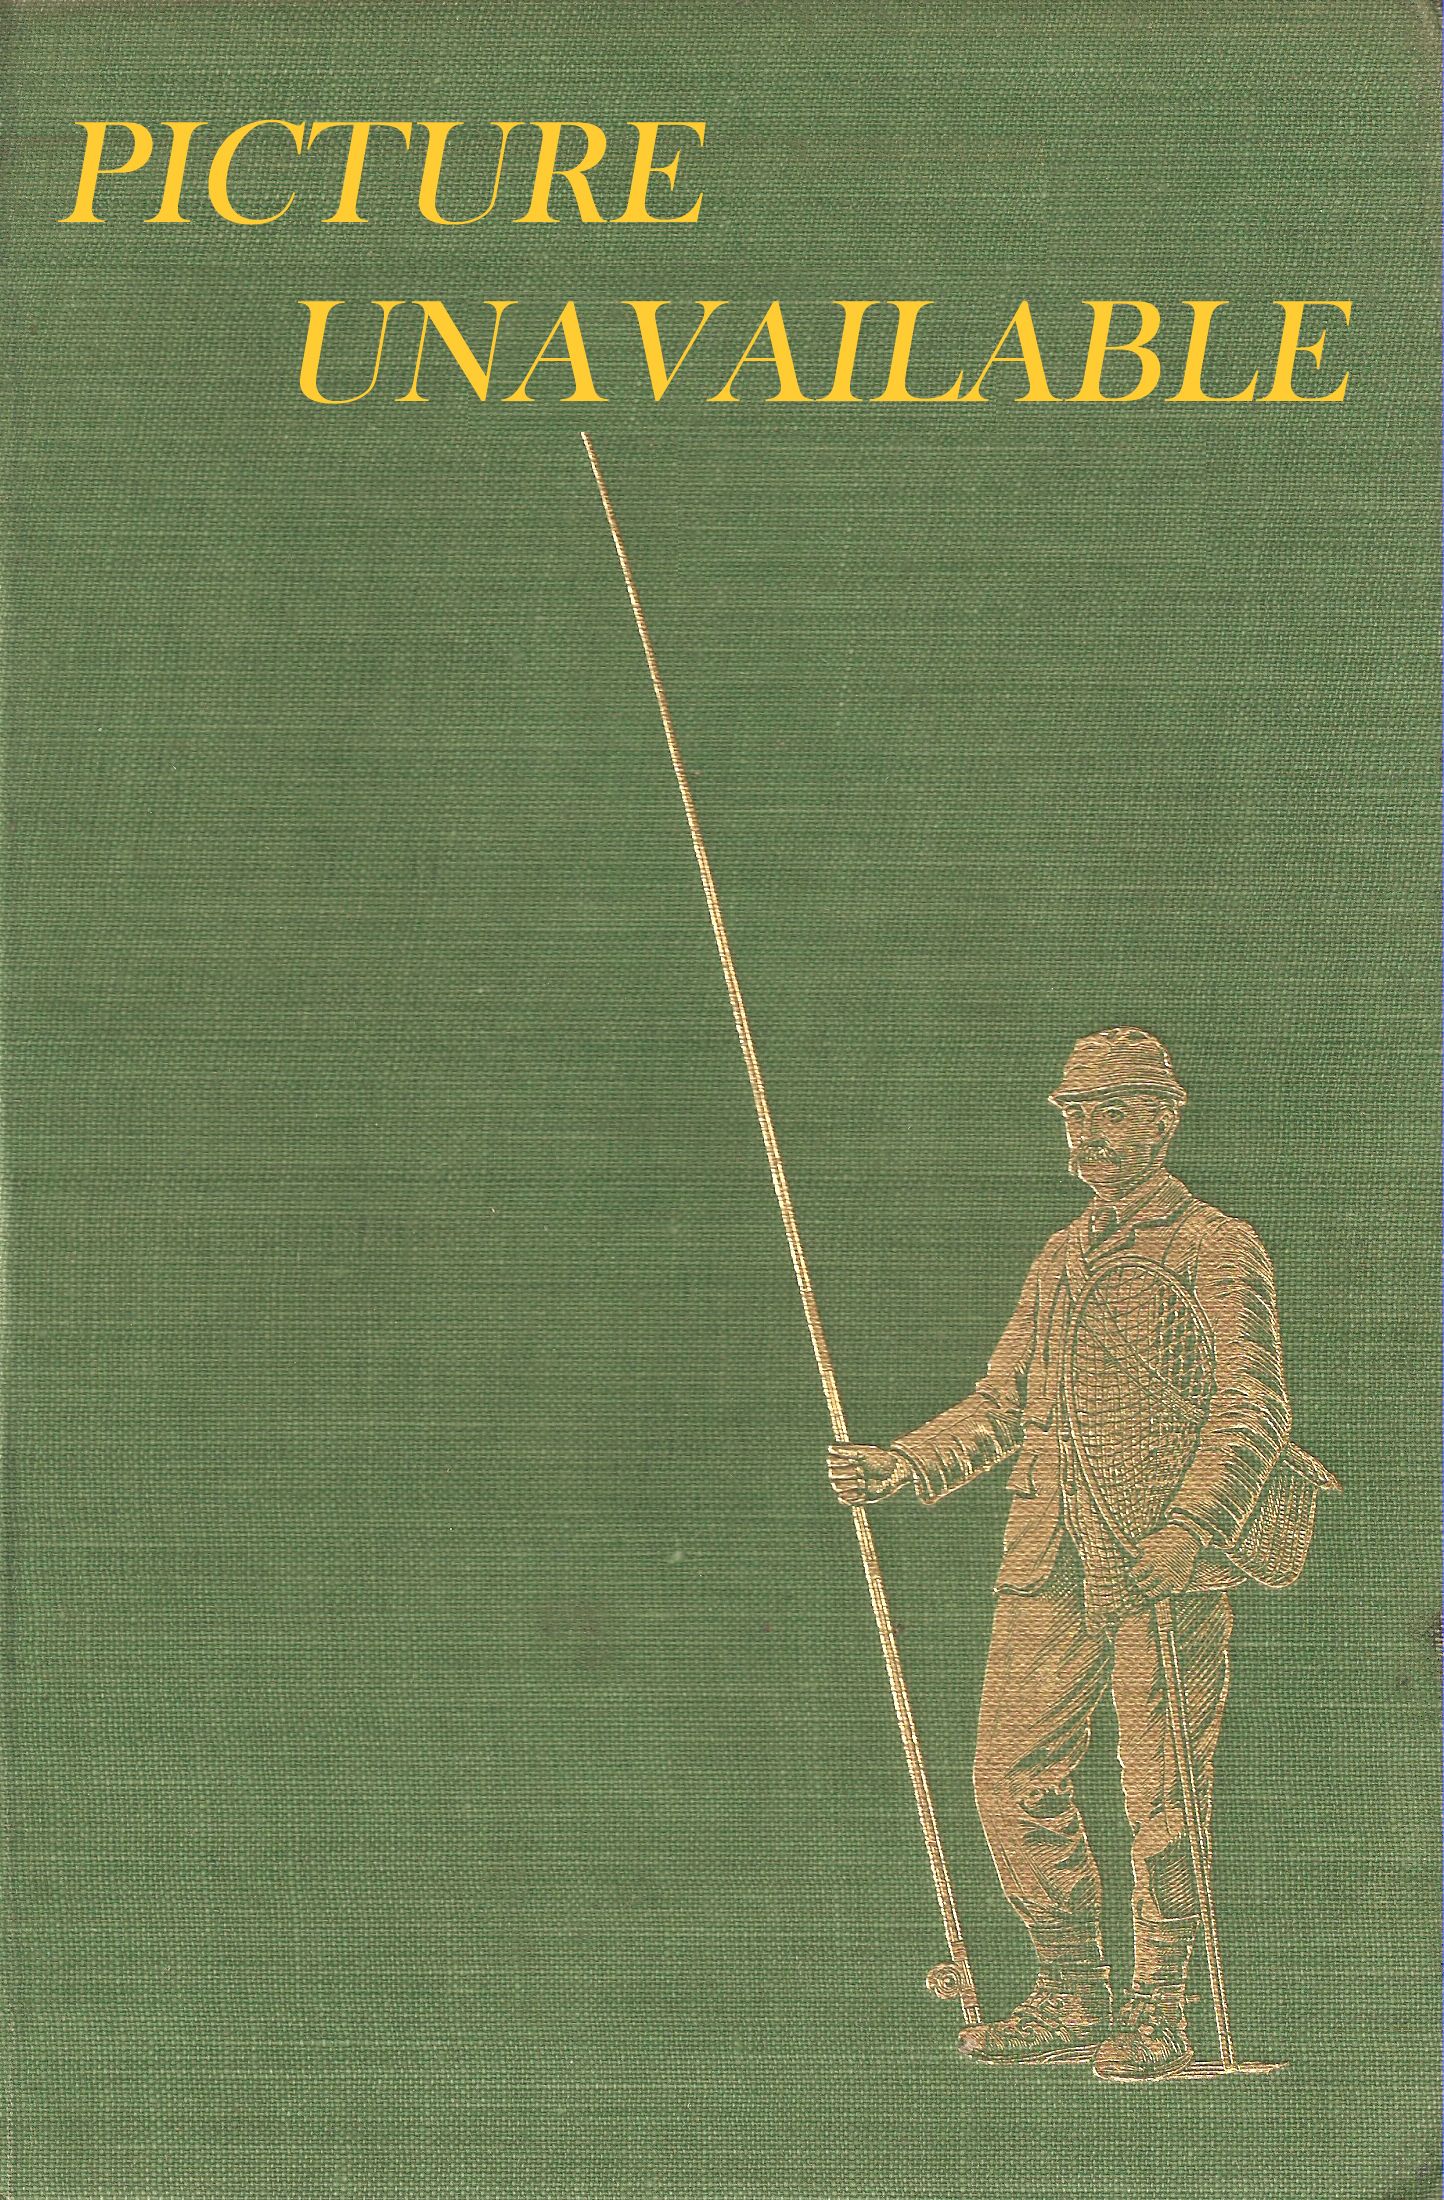 THE COMPLEAT ANGLER. By Izaak Walton and Charles Cotton. Edited with an  introduction by Richard Le Gallienne. Illustrated by Edmund H. New.  Coigney 455. The Tenth Le Gallienne Edition.